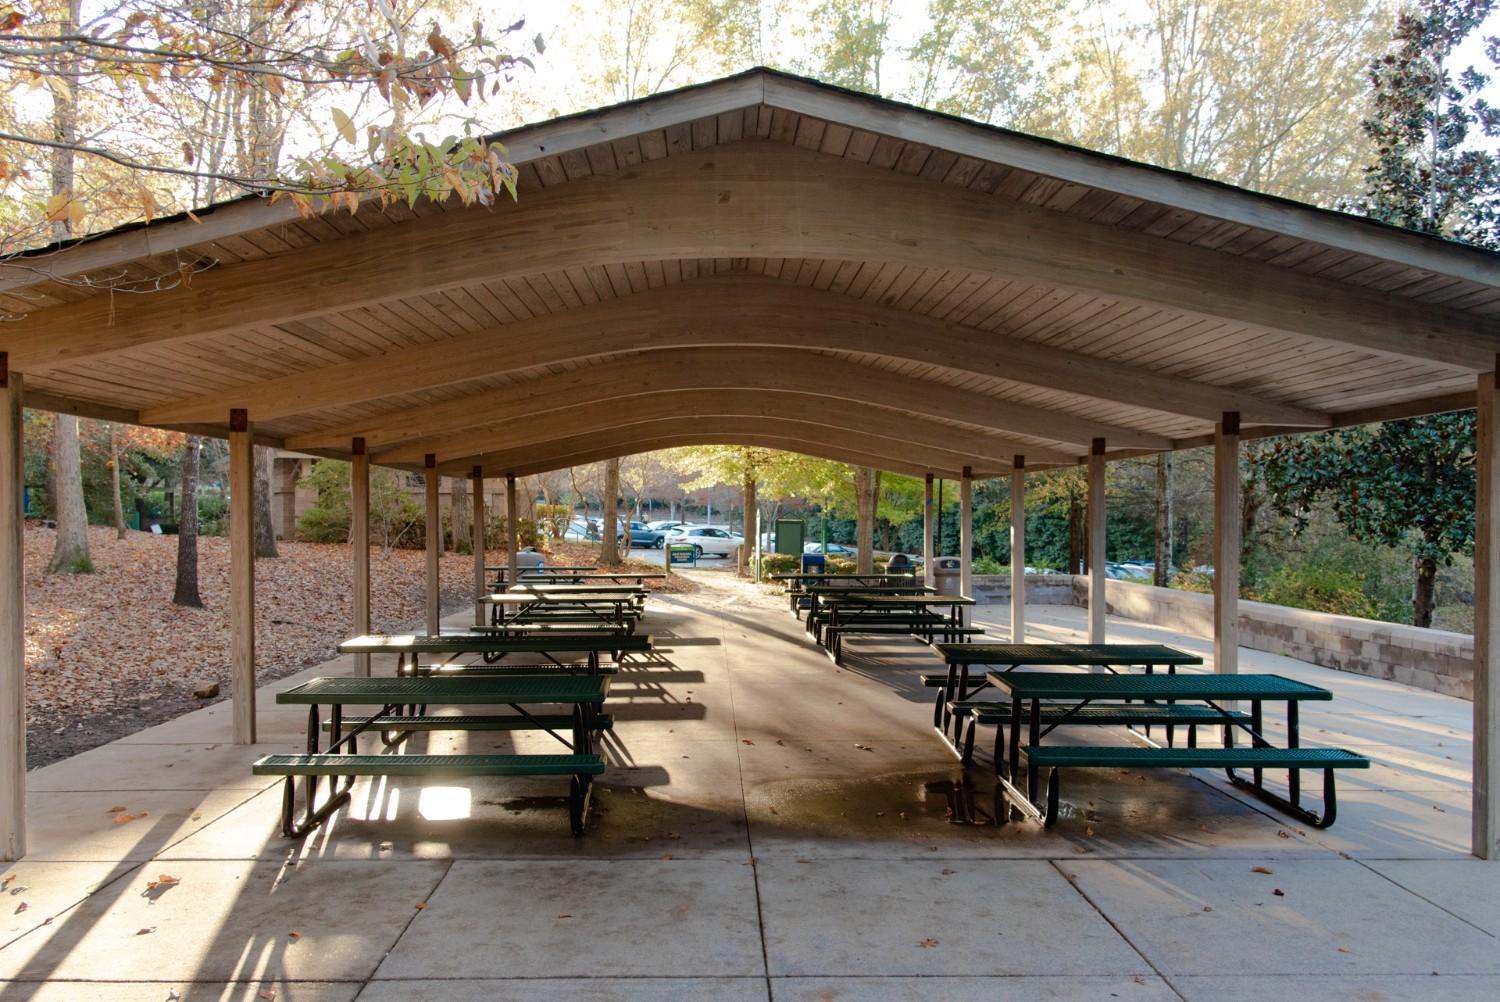 North Cary Park Shelter (100)